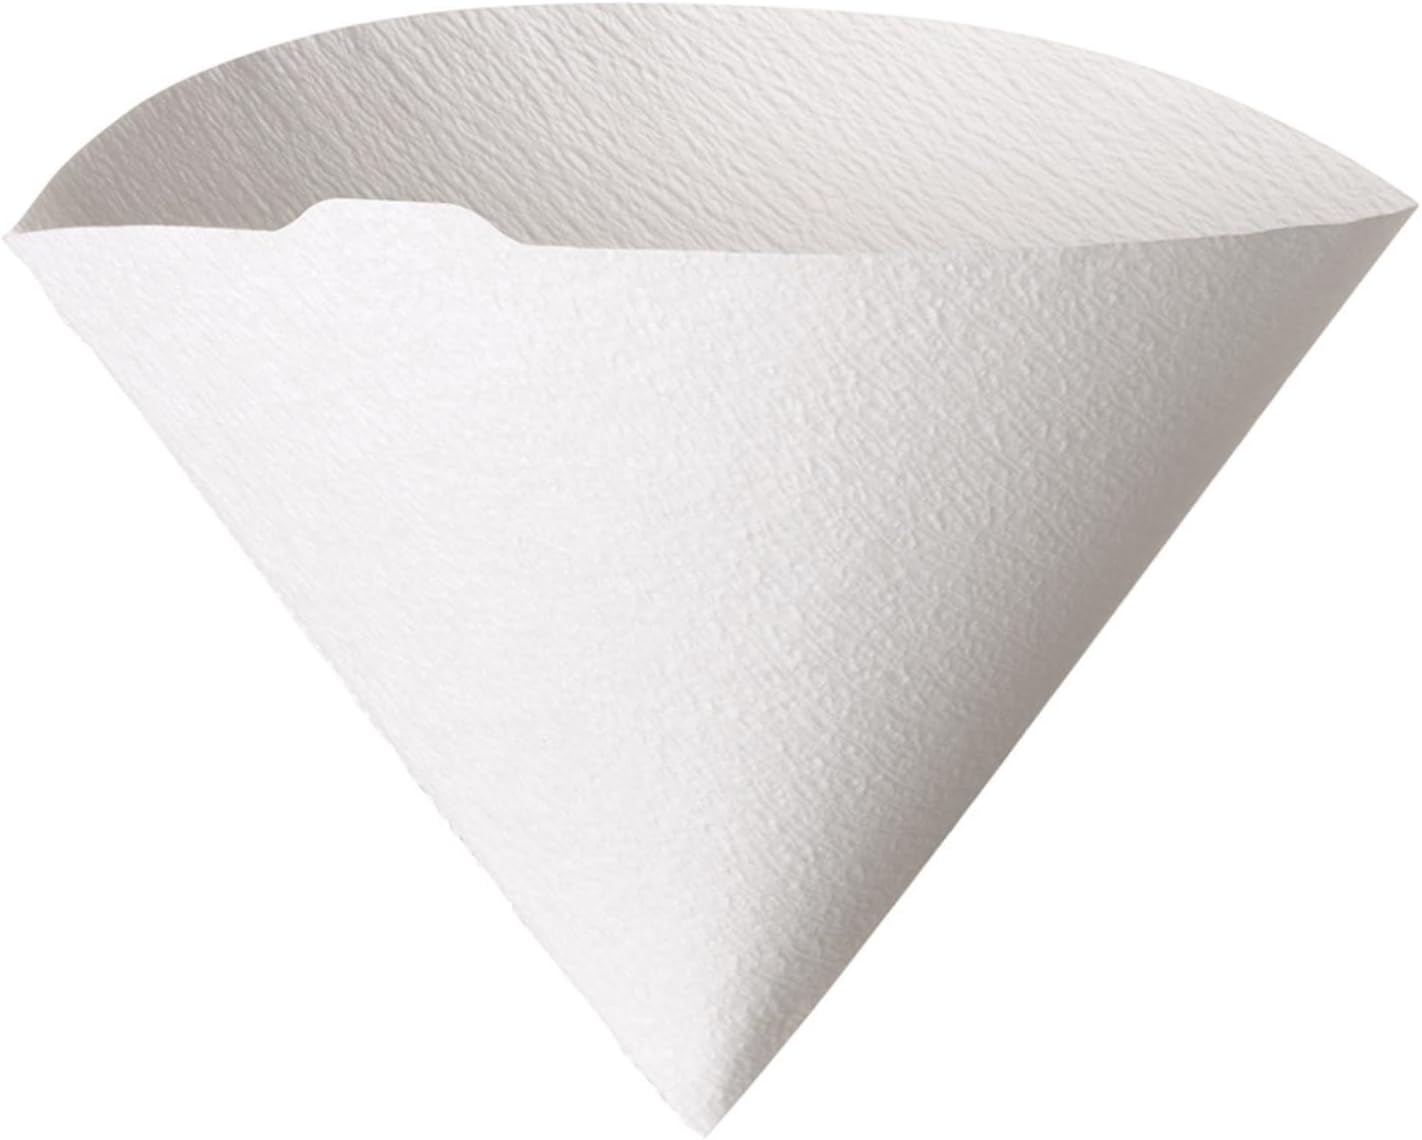 Hario V60 Paper Coffee Filters, Size 02, Natural, 200 Count